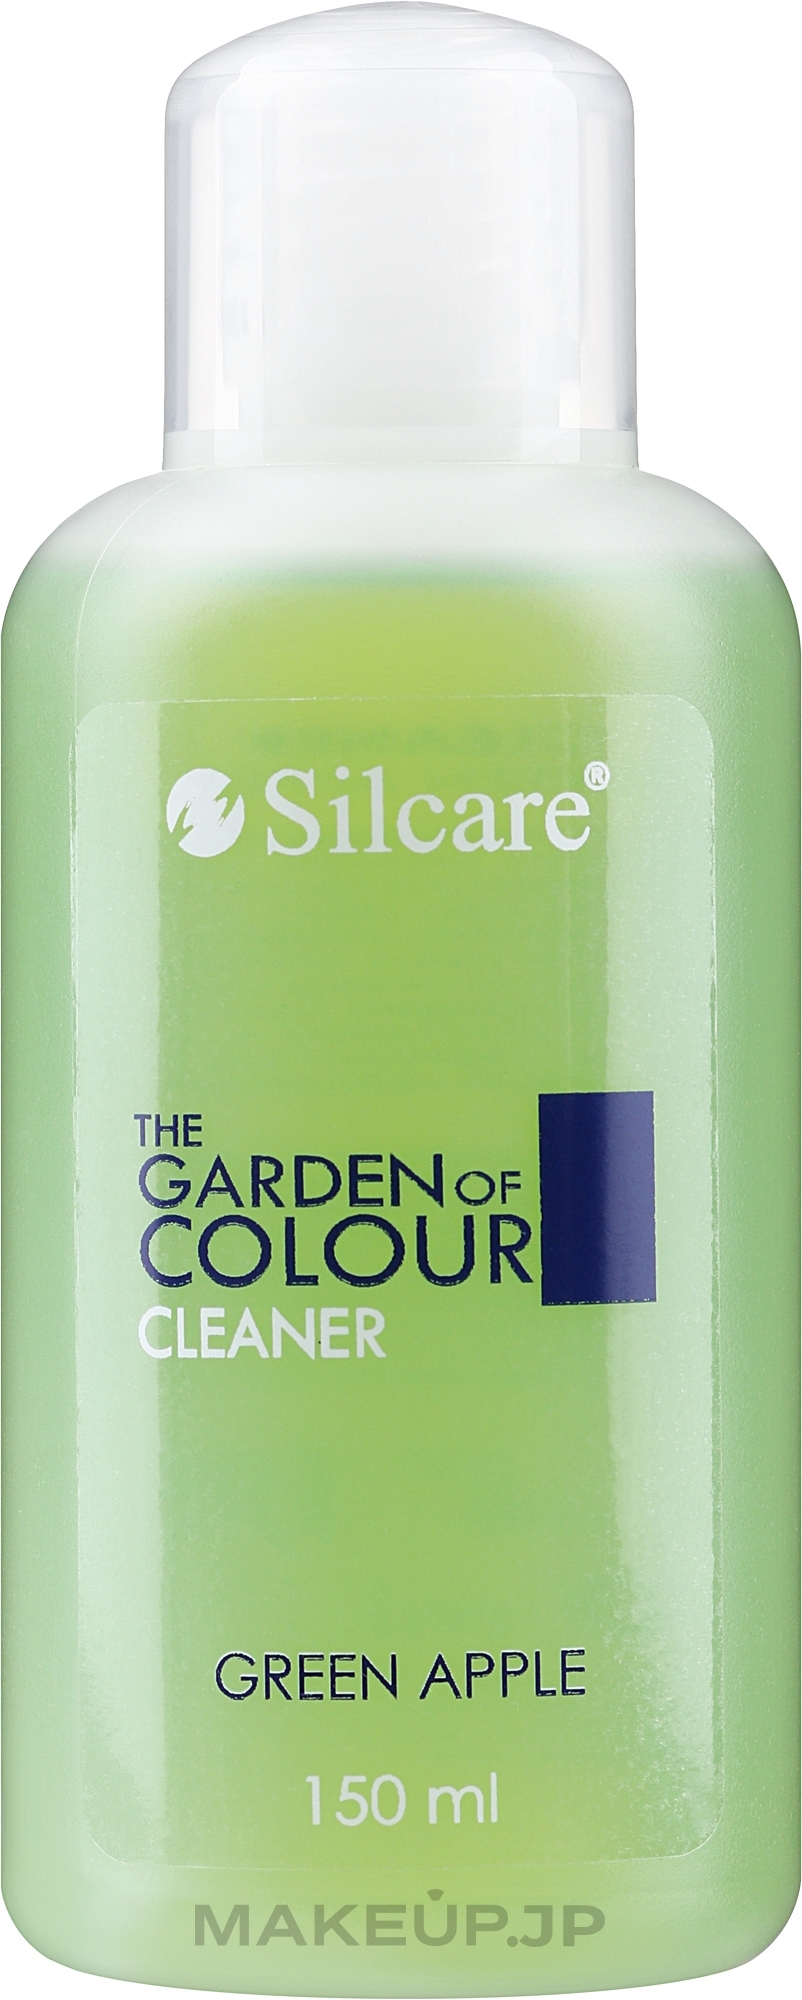 Nail Degreaser "Green Apple" - Silcare Cleaner The Garden Of Colour Green Apple — photo 150 ml